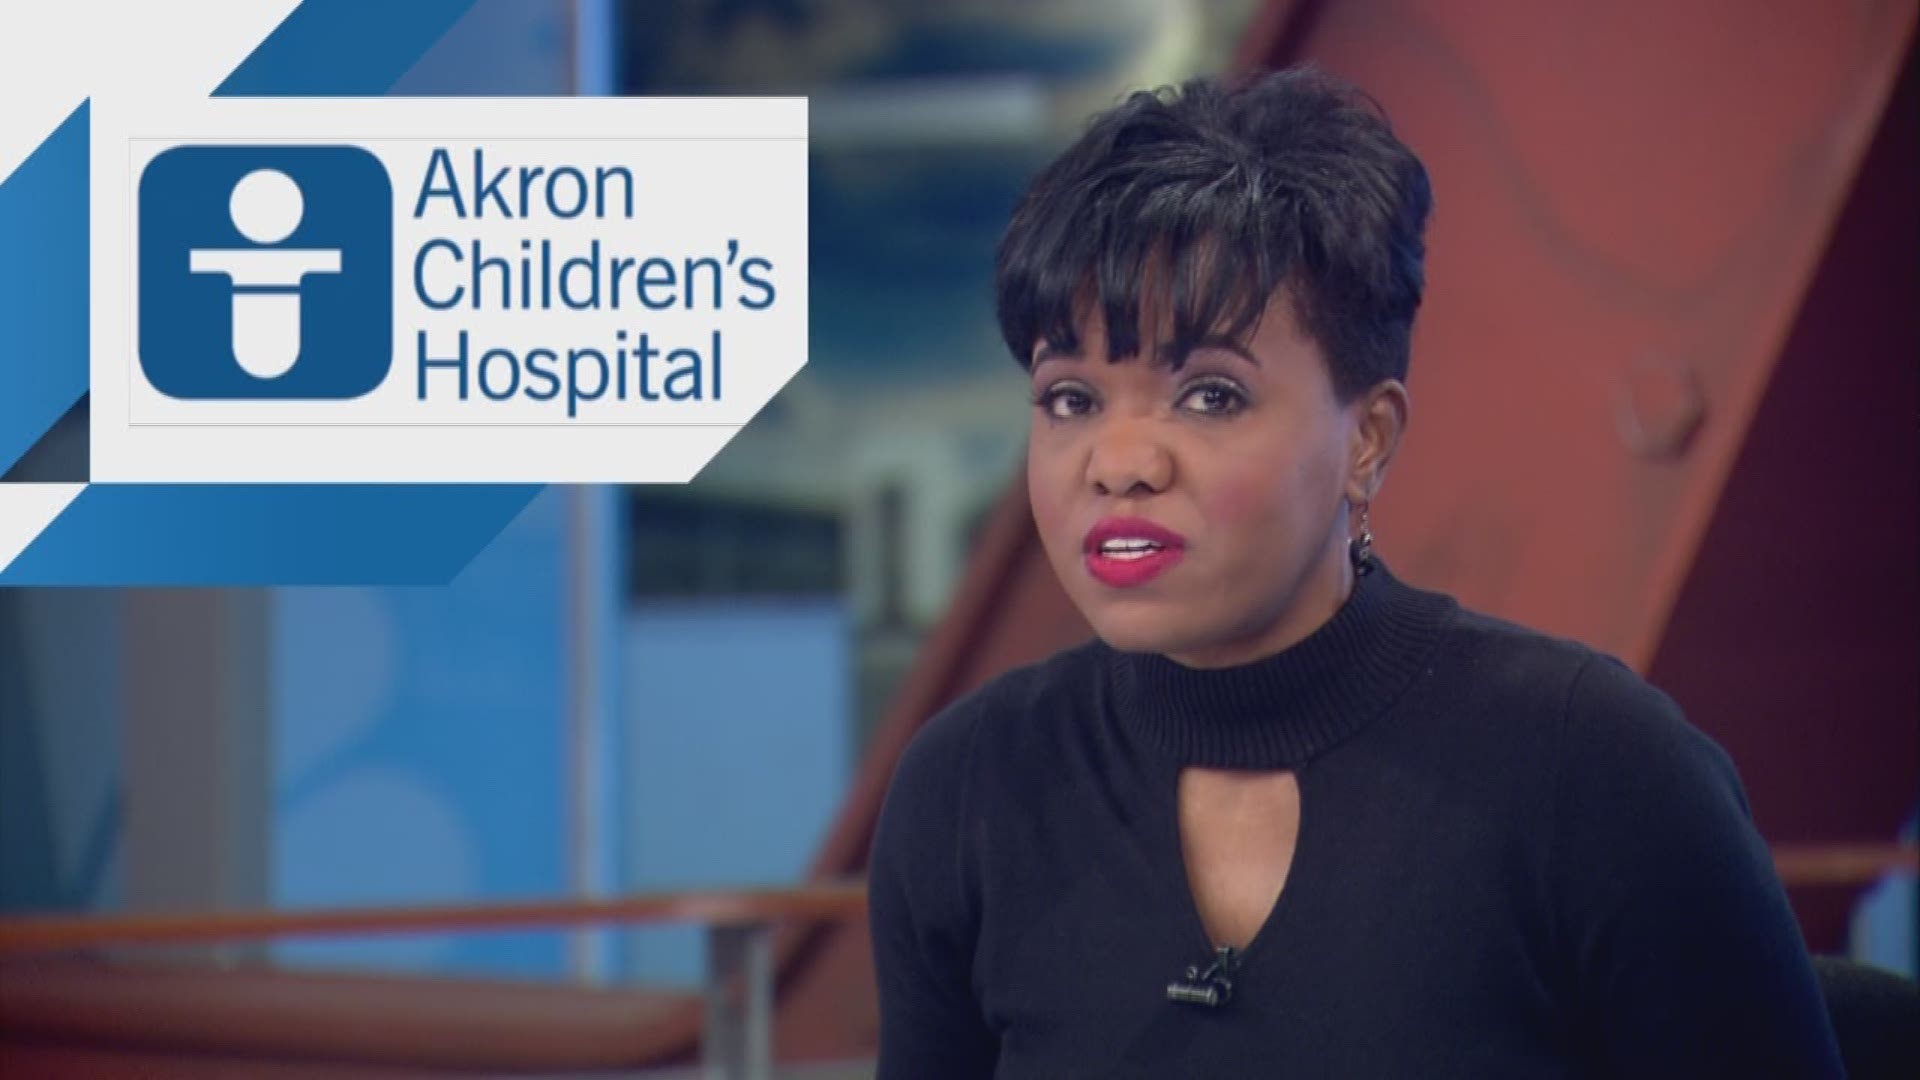 March 21, 2018: Akron Children's Hospital has permanently closed the Locust Parking Deck after an engineering report found 'serious structural concerns with the 46-year-old deck.' The deck featured 656 parking spaces.